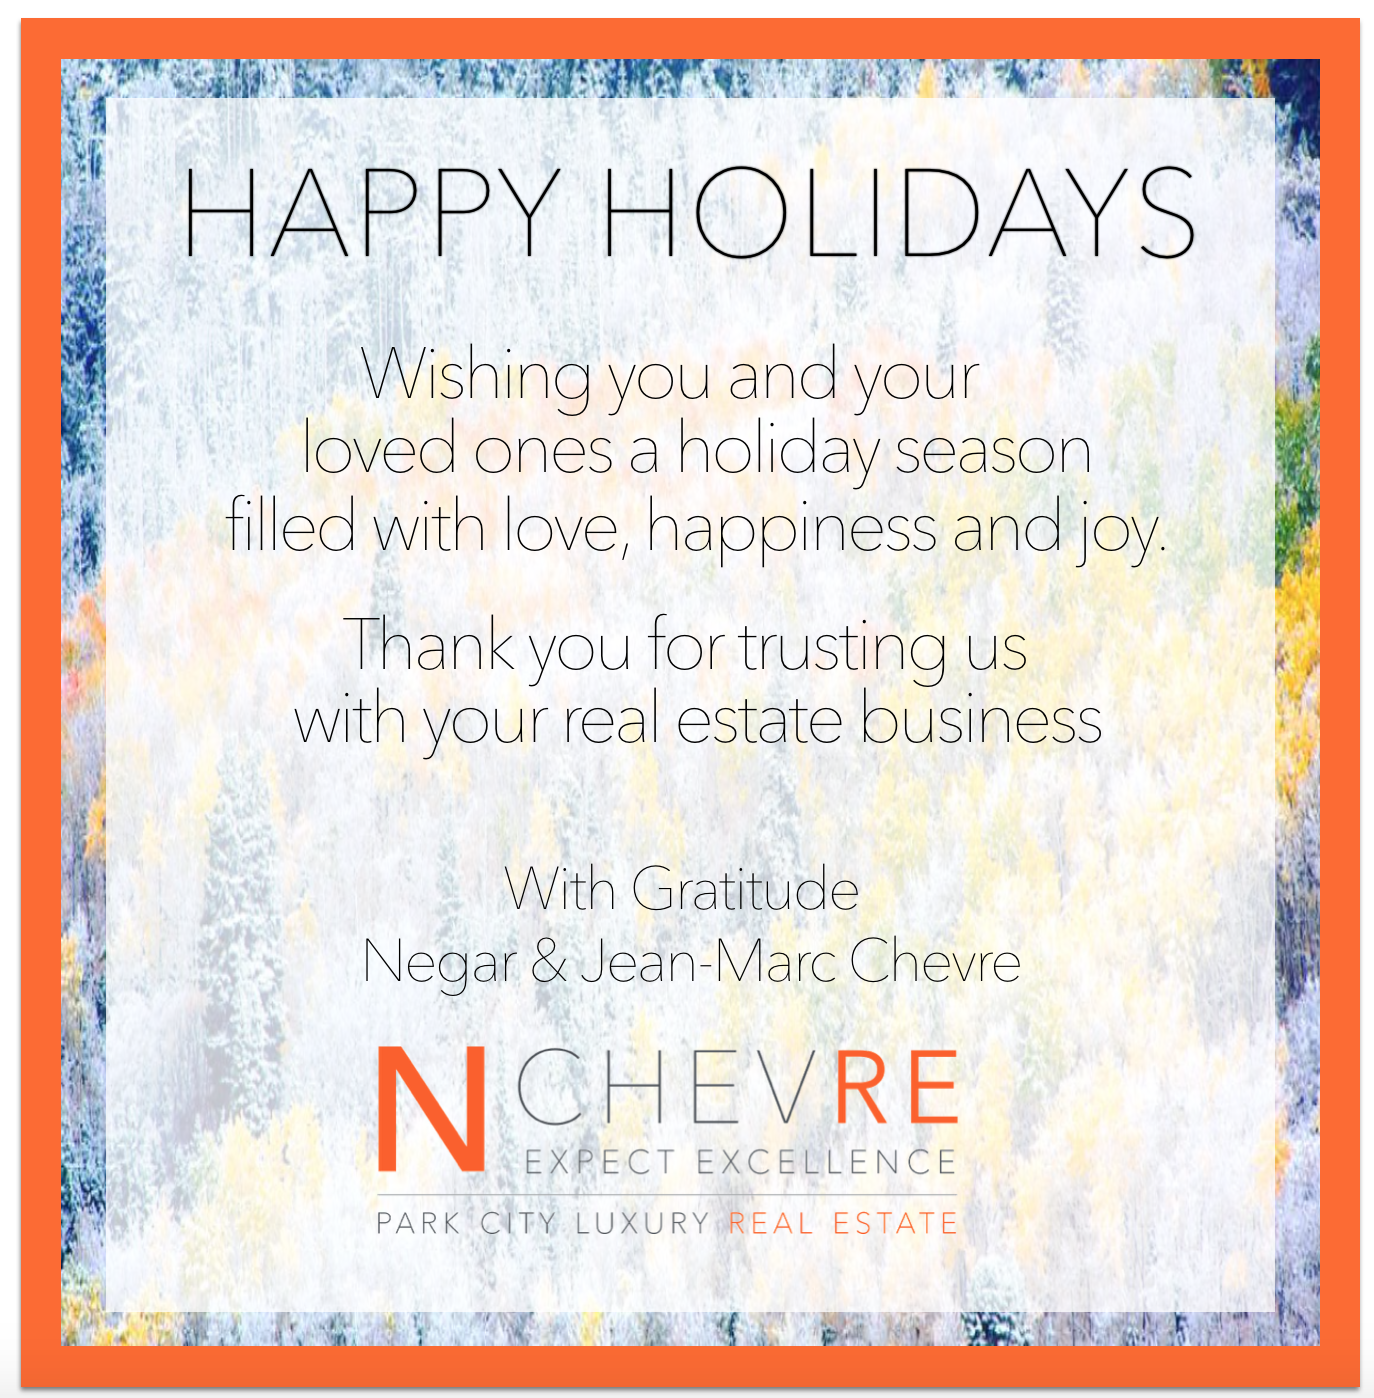 Happy Holidays Nchevre Real Estate